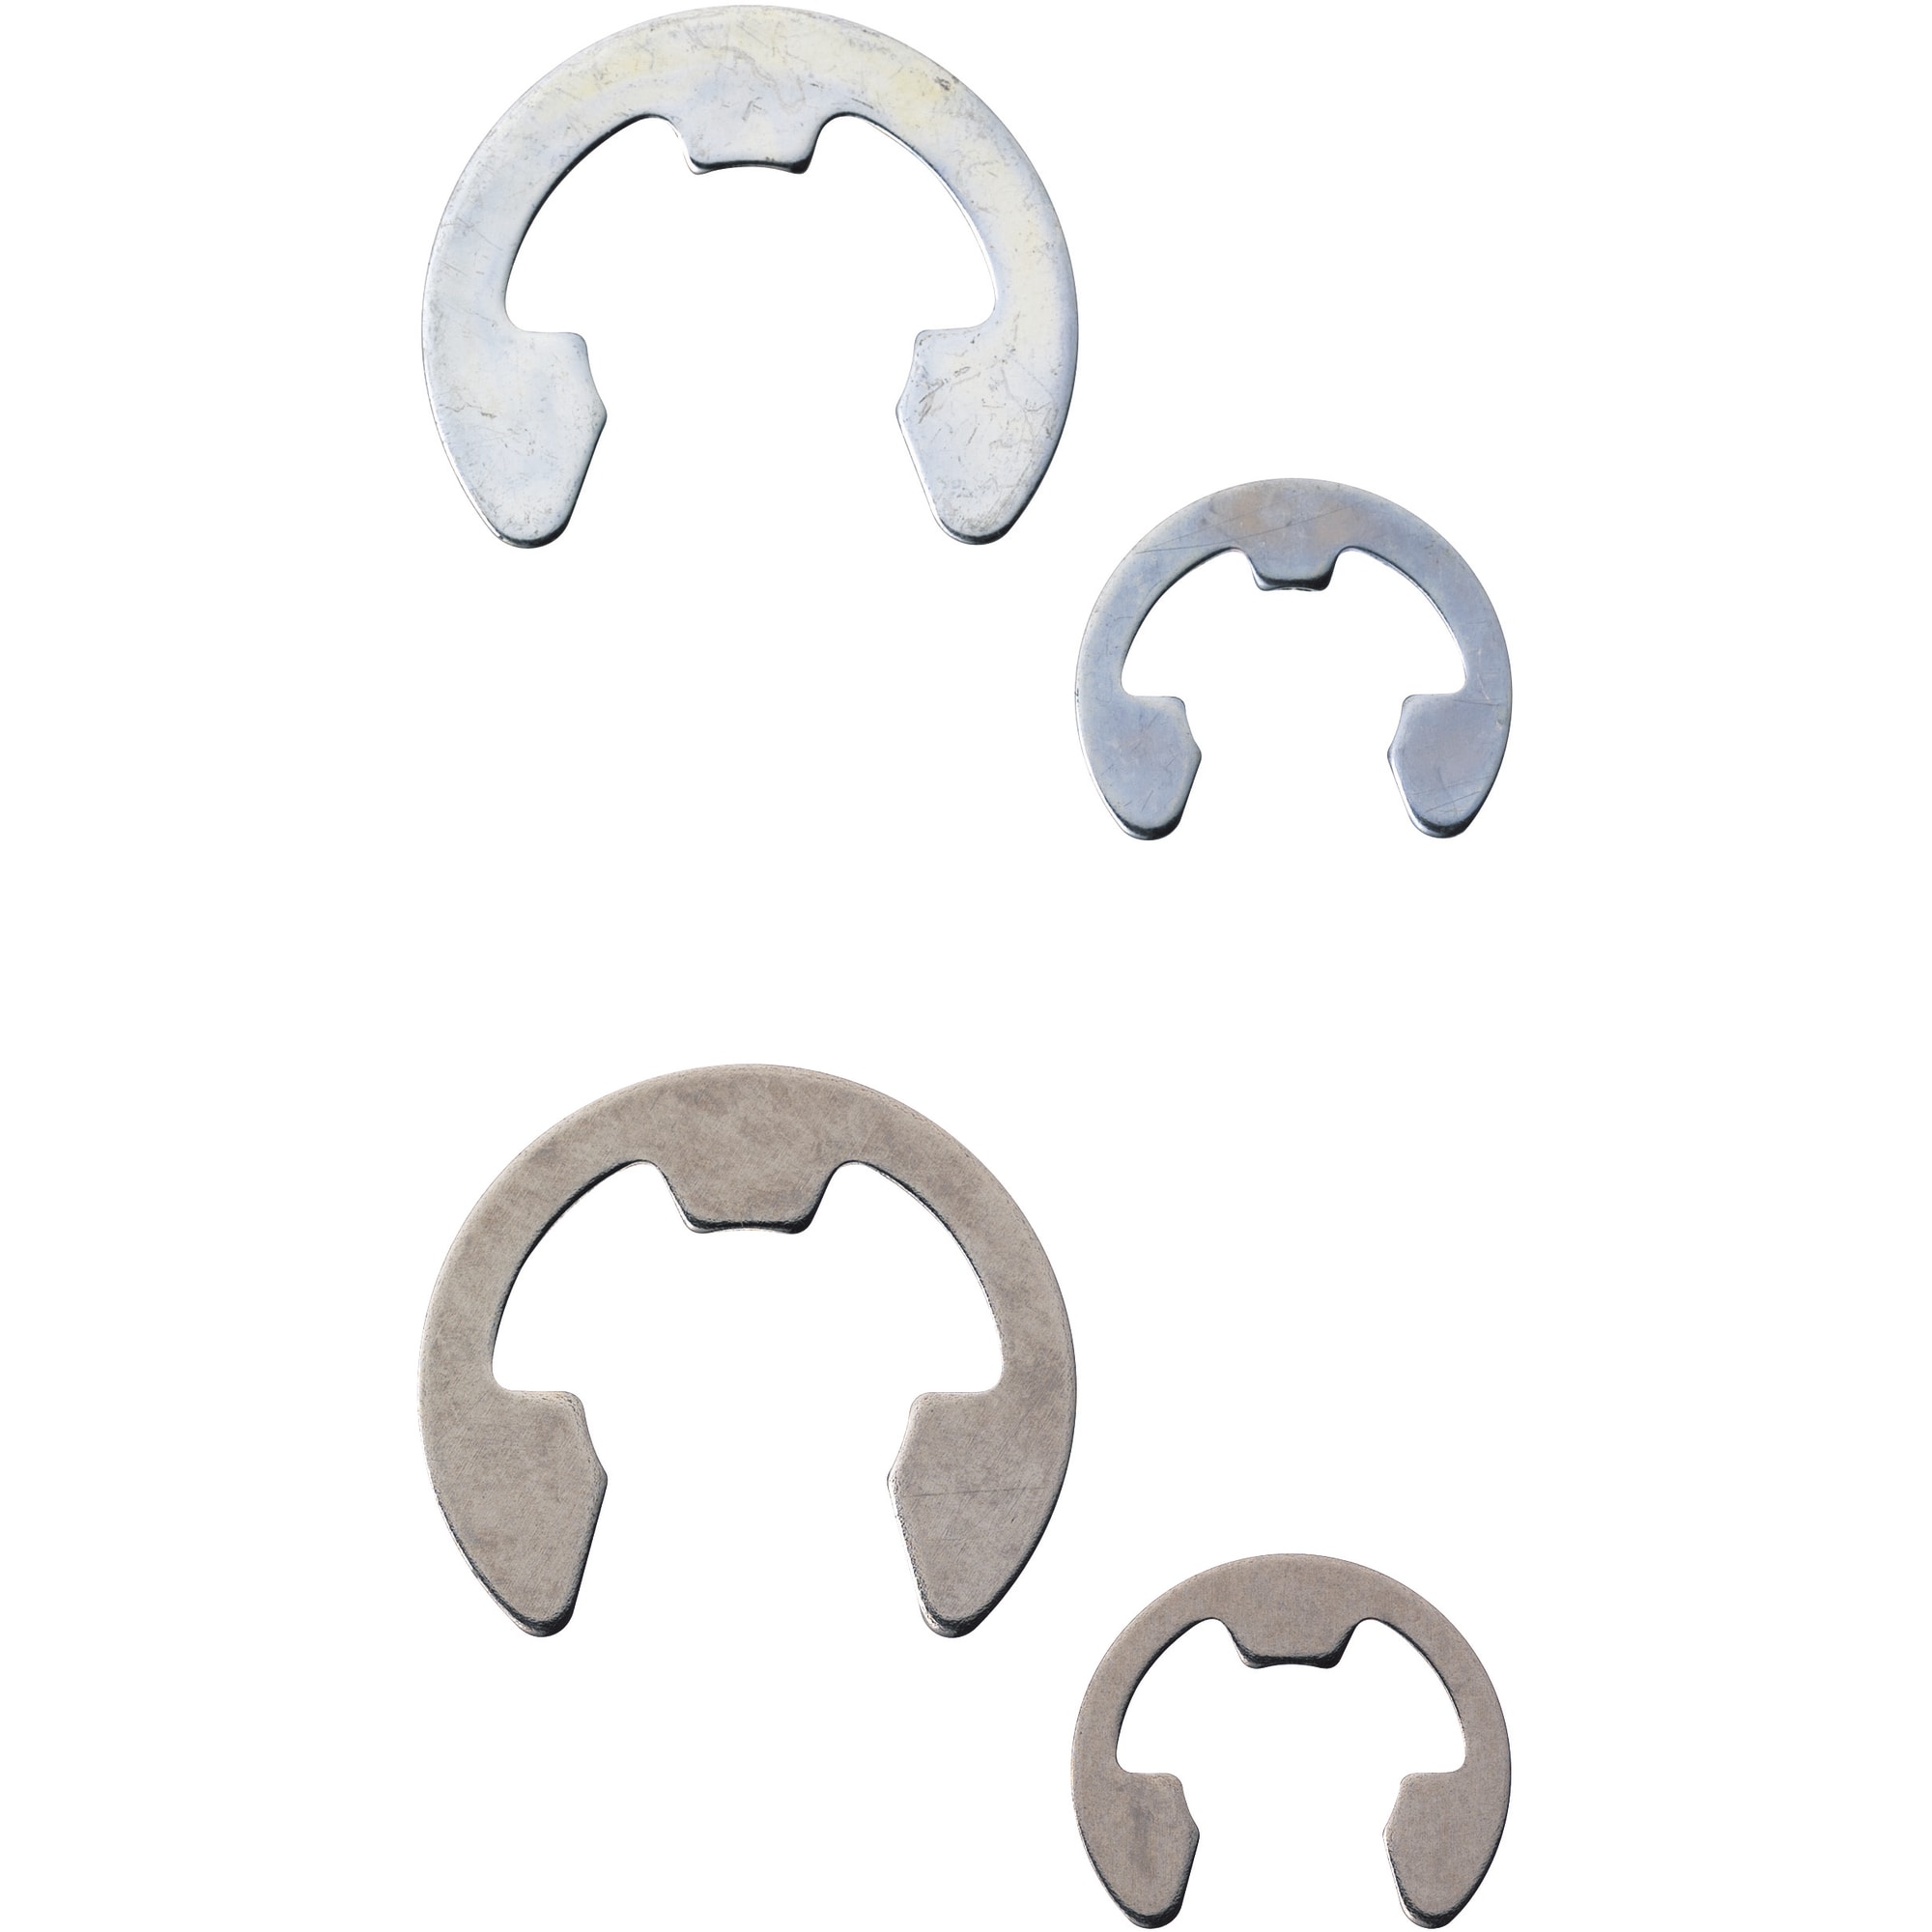 V2600-LW7 Ring - Military Fasteners